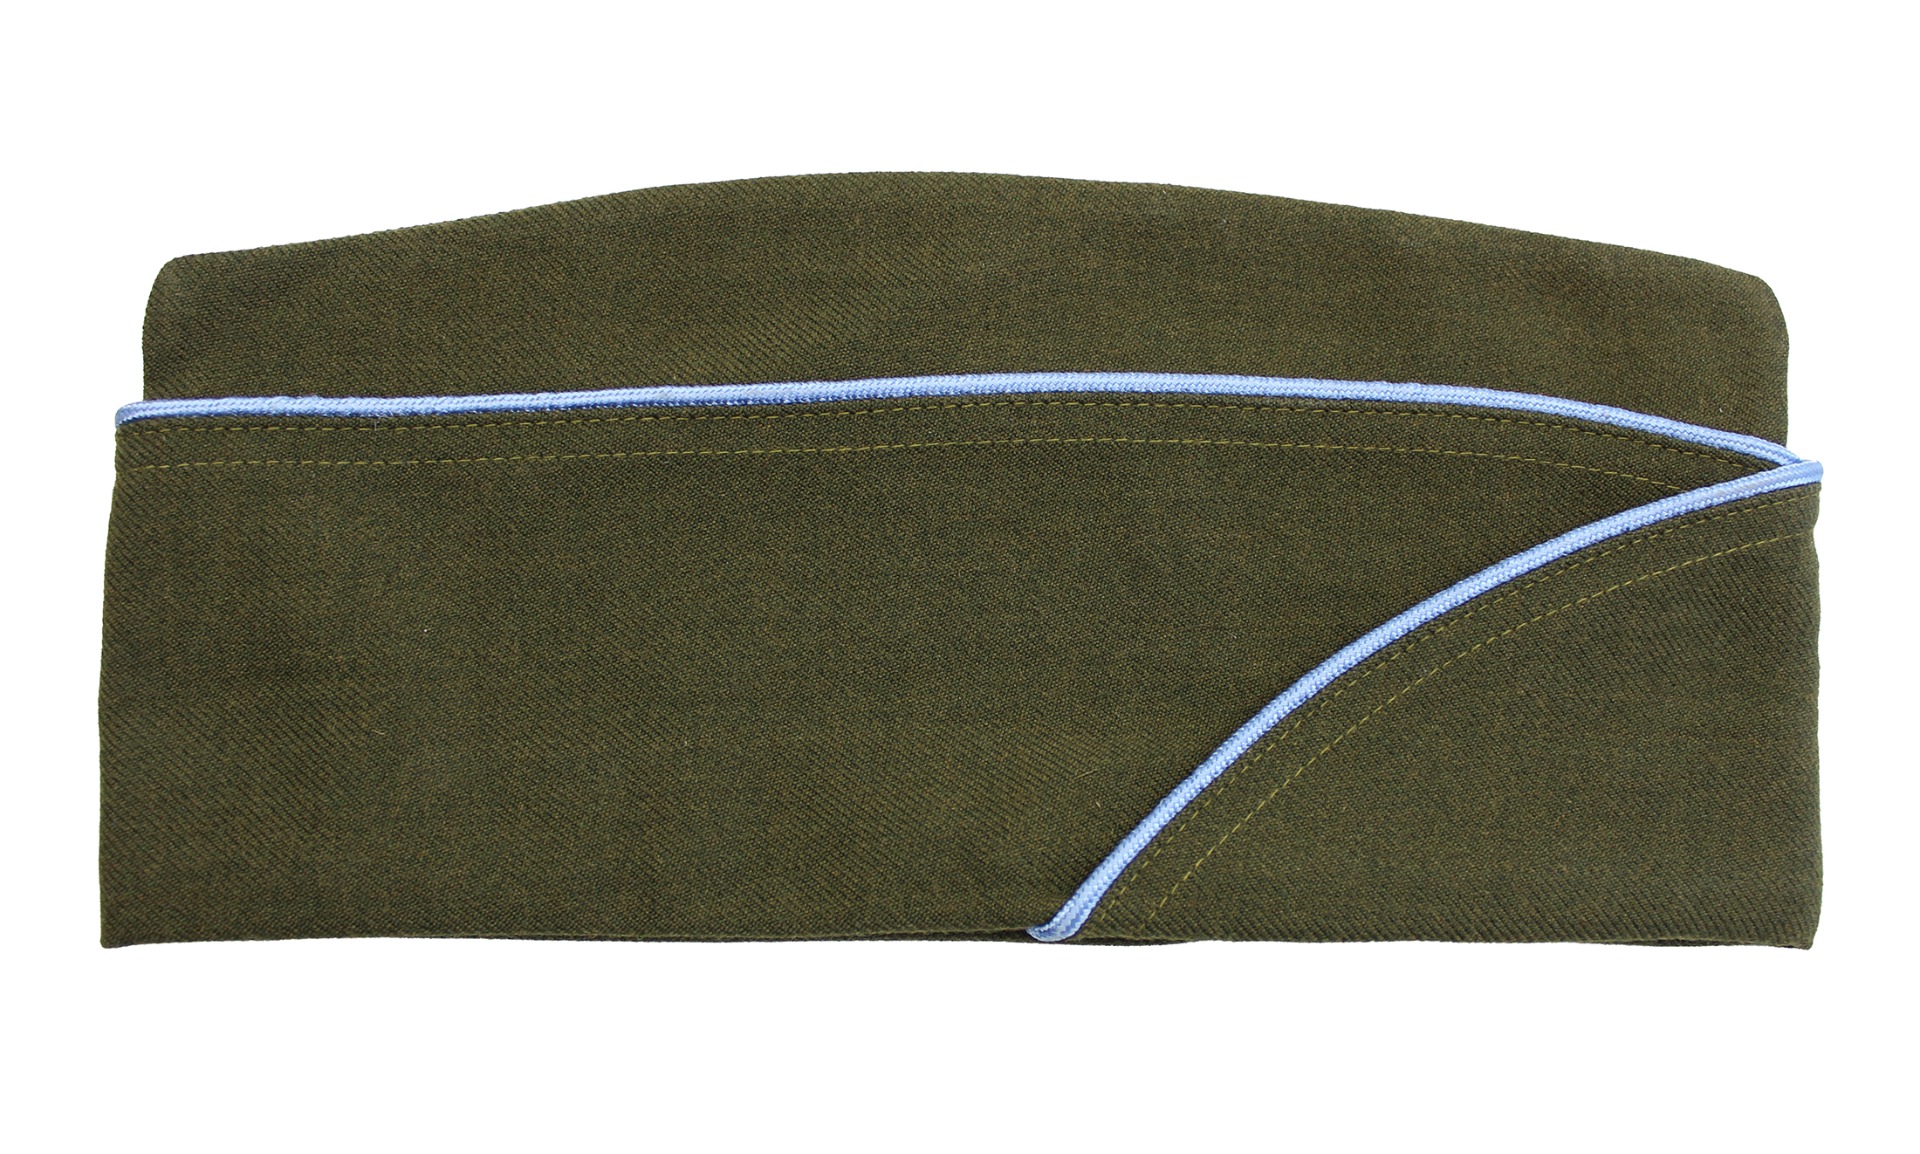 AMERICAN PX GARRISON CAP WITH BLUE PIPING FOR INFANTRY OR PARATROOPERS AIRBORNE